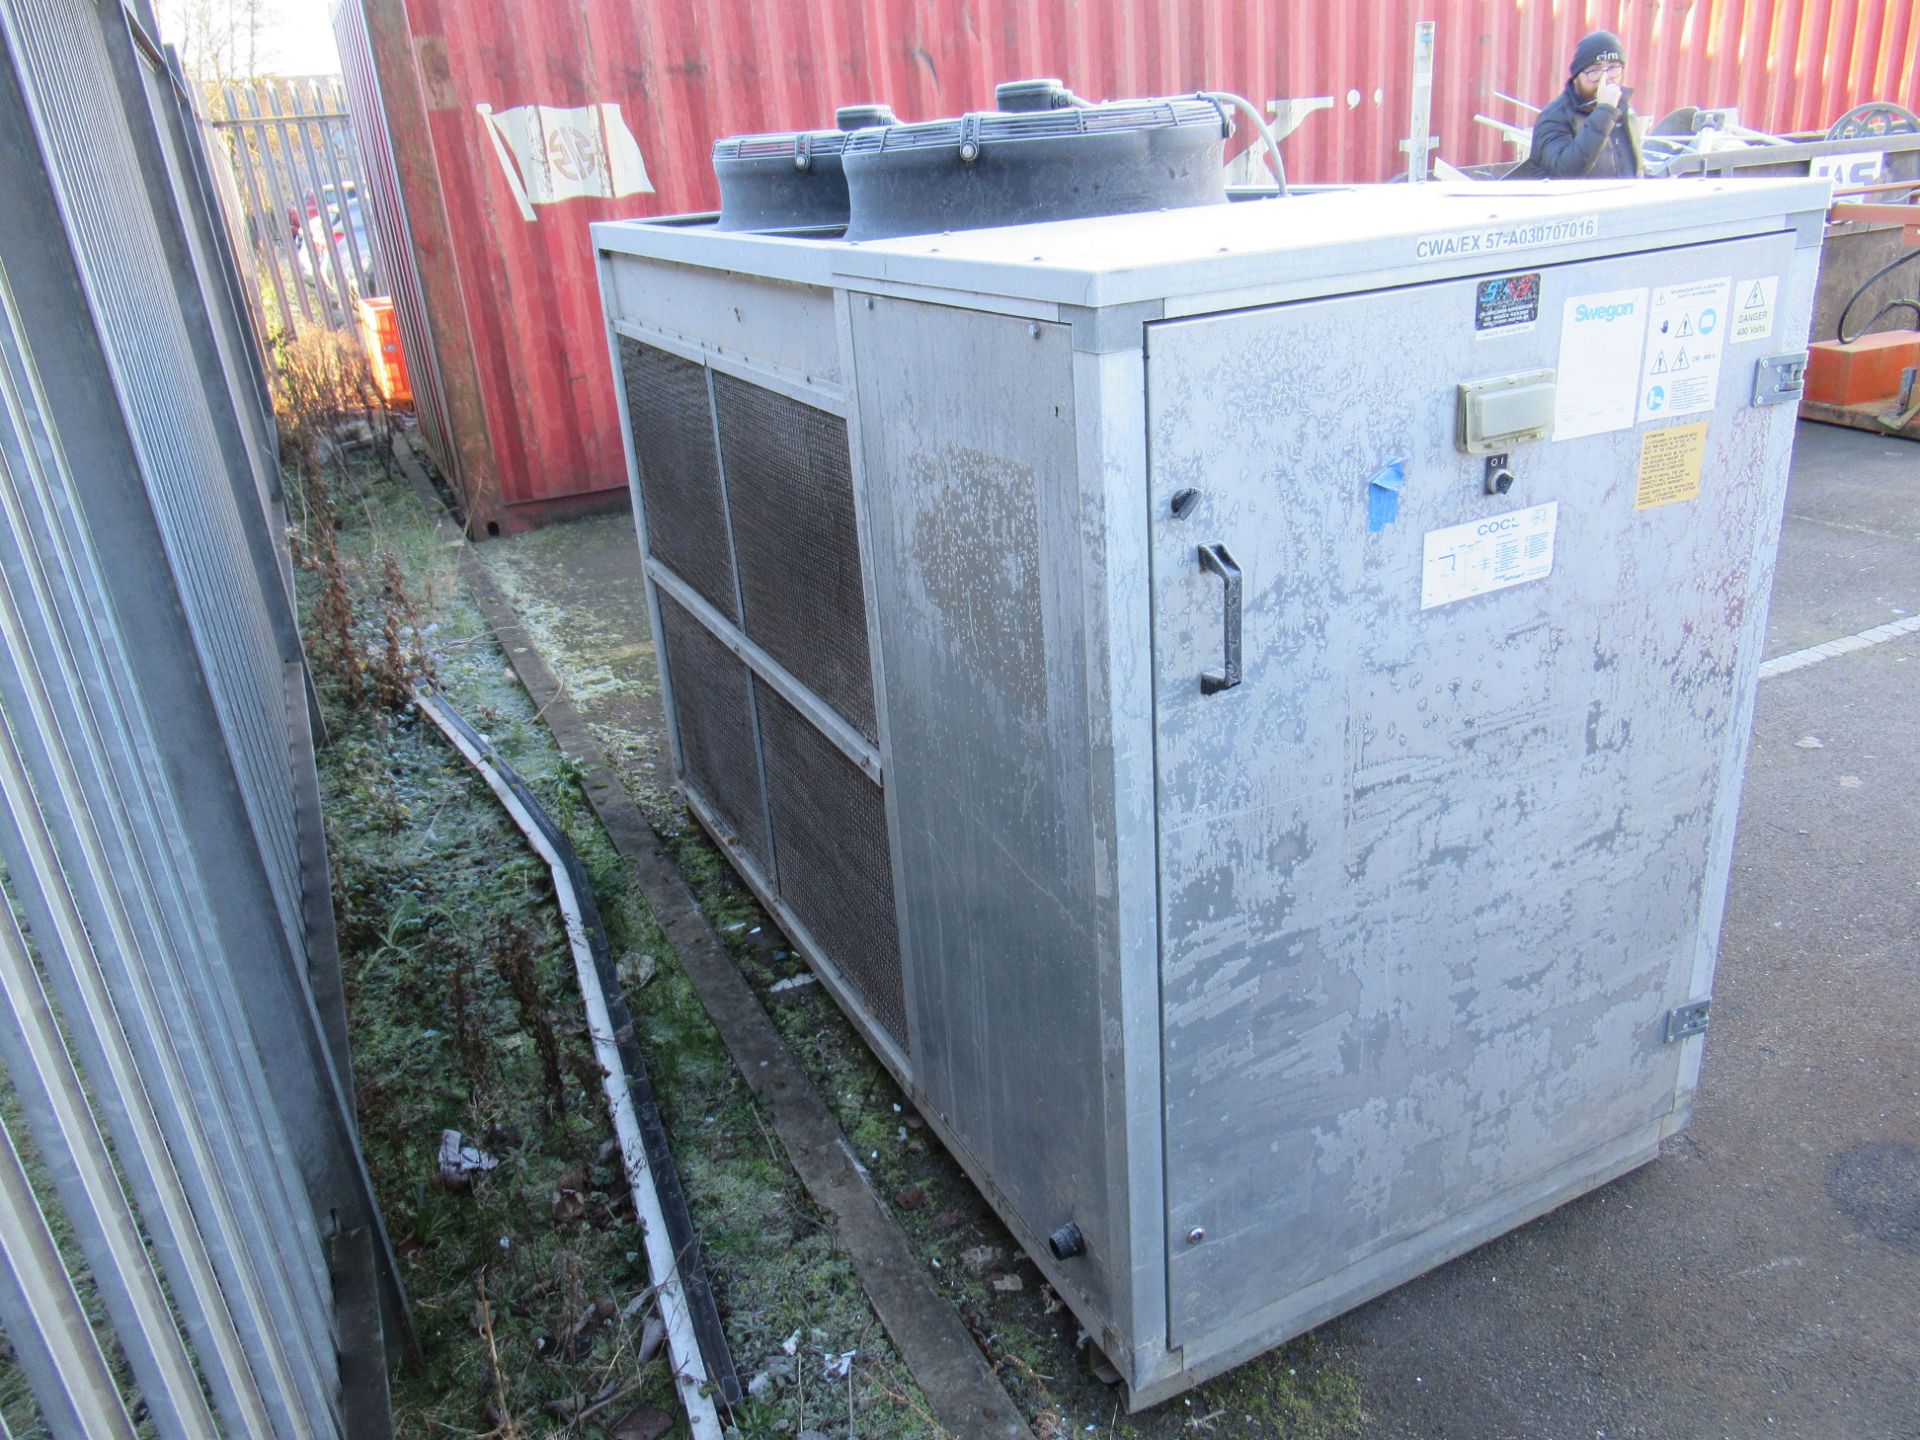 Rhoss industrial water chiller, model number CWA/EX57,66 kW cooling capacity - Image 3 of 14